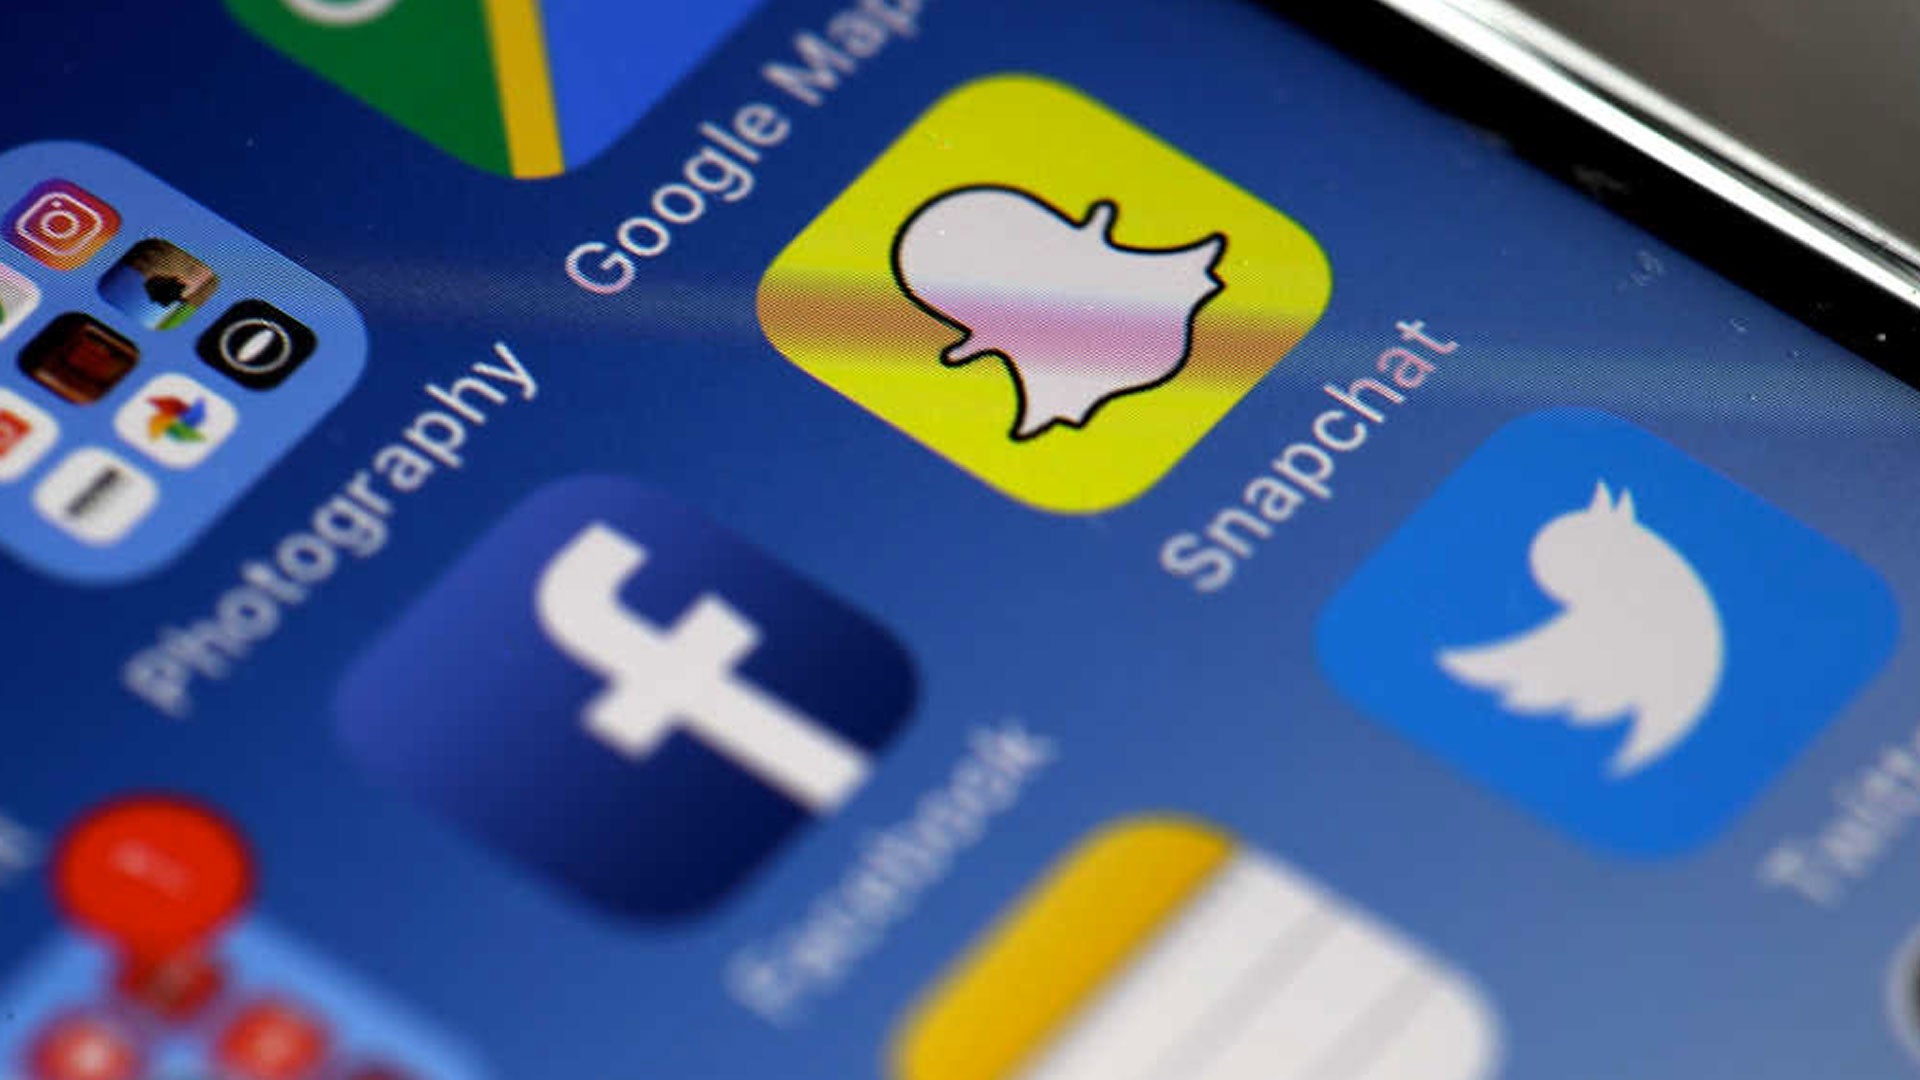 Pornhdv Com - Snapchat Cancels Pornographic 'Cosmo After Dark' Channel After One Week |  CBN News